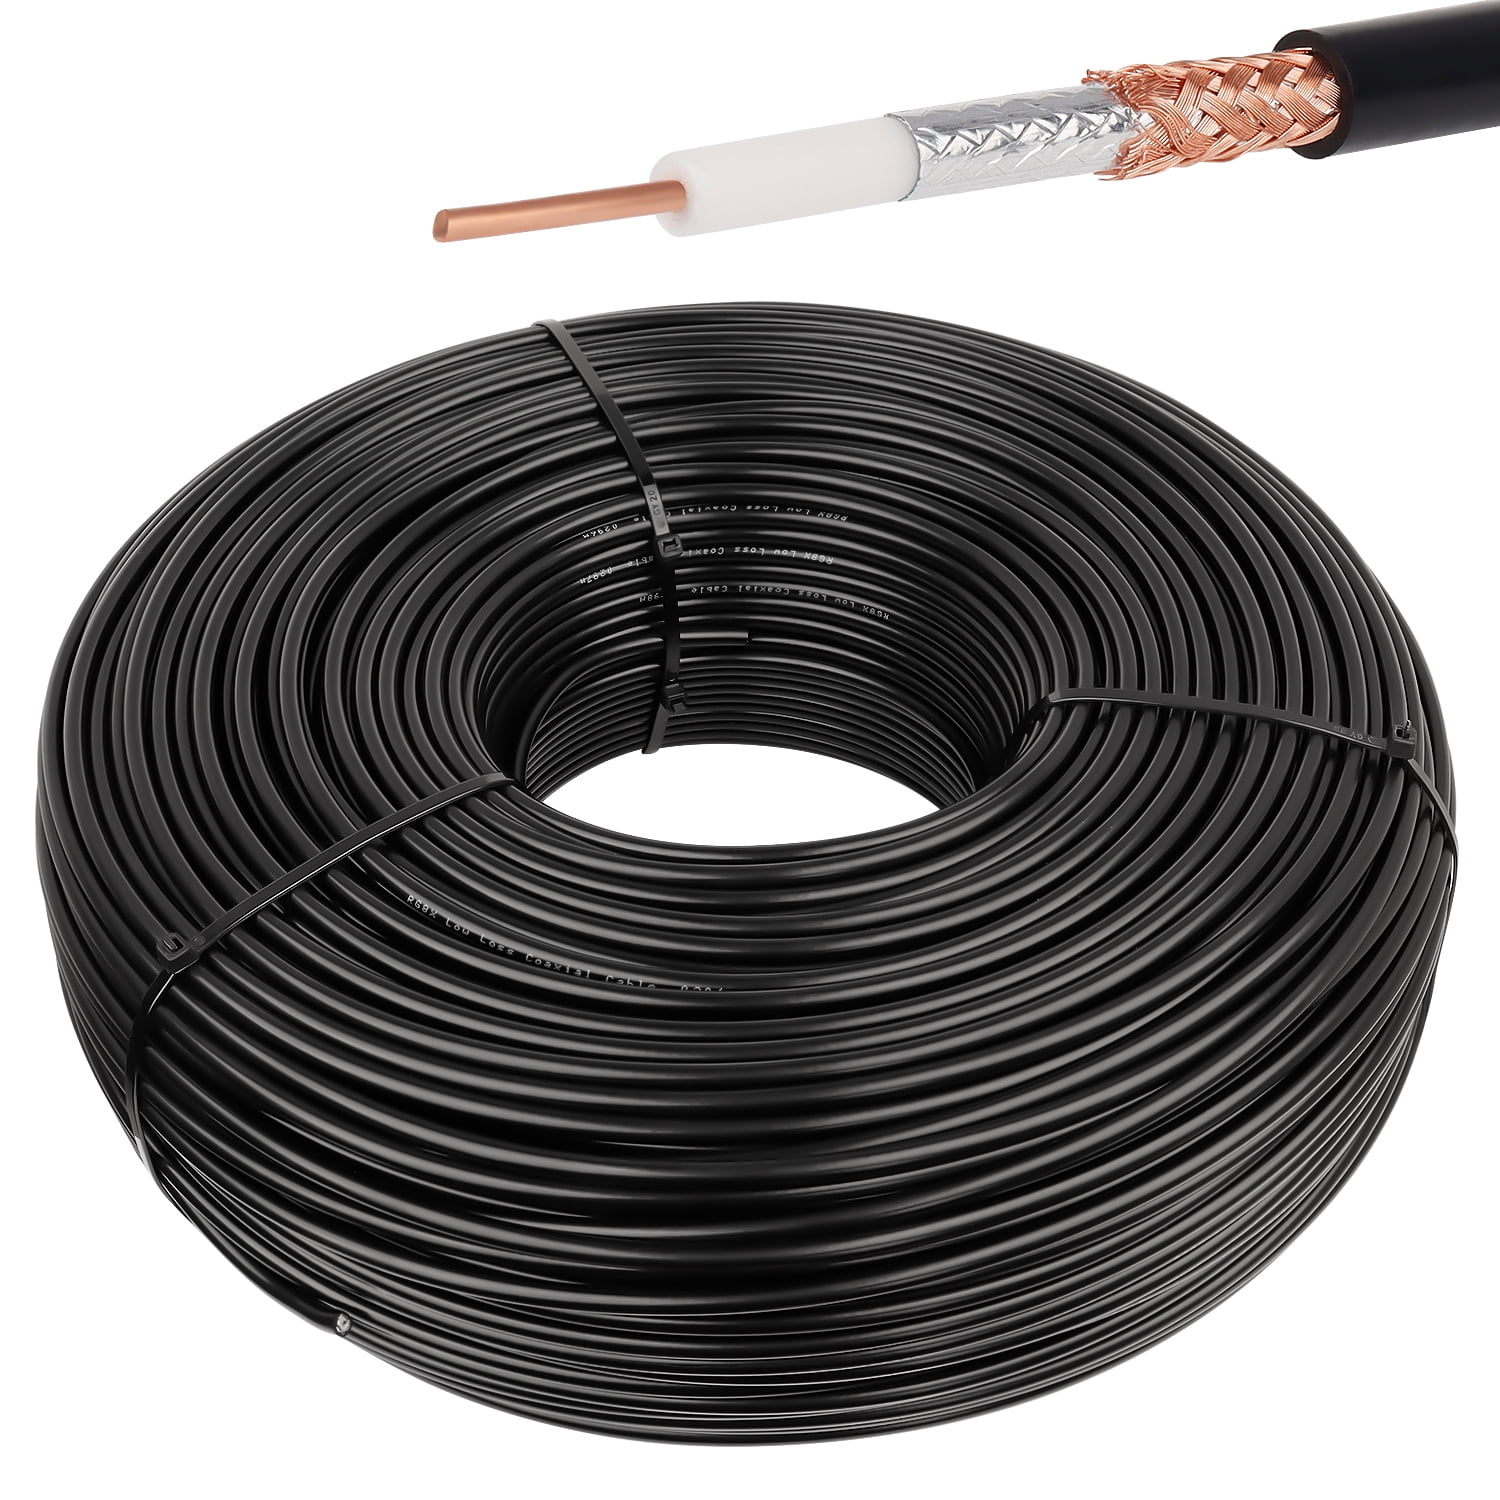 RG8X Extension Cable & Network 100ft, Low Antenna Router Cable 4G Coaxial Loss Flexible Pigtail Ohm RG8X 50 Cable Coax for RF Black Wired Impedance Wireless MOOKEERF Cable